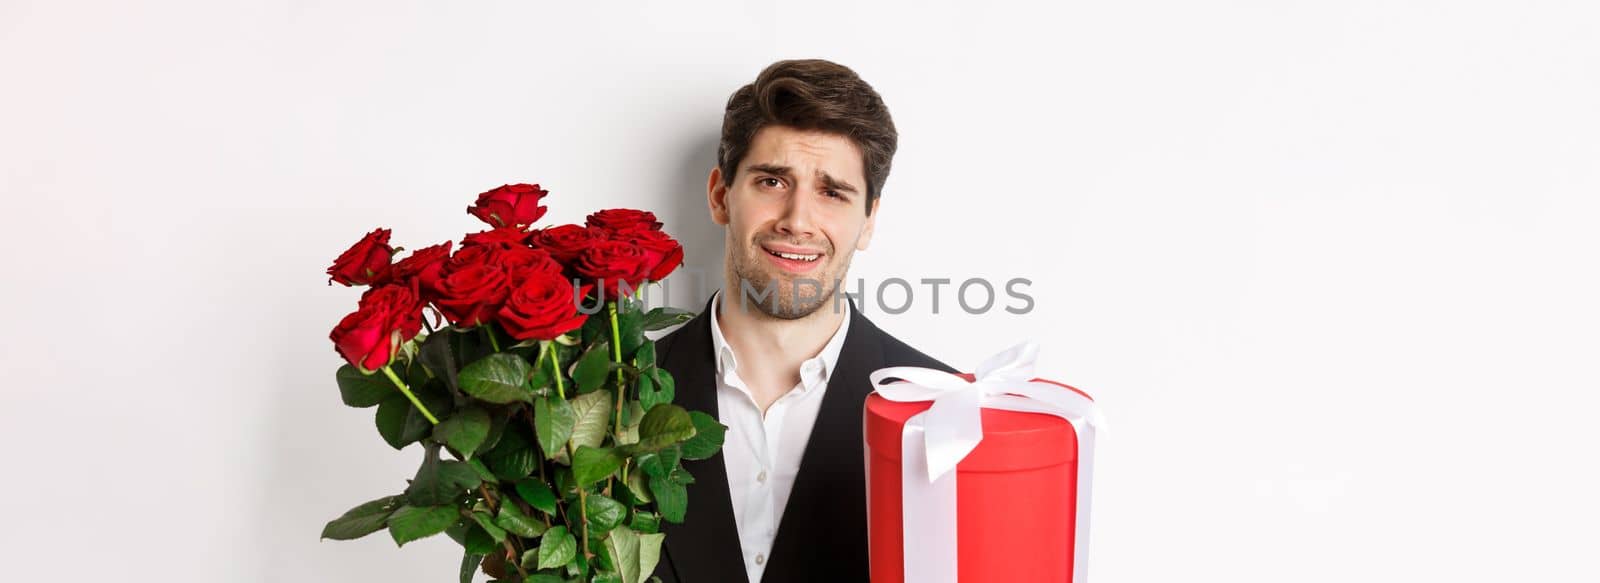 Close-up of skeptical man in suit, holding bouquet of red roses and a gift, standing reluctant against white background.